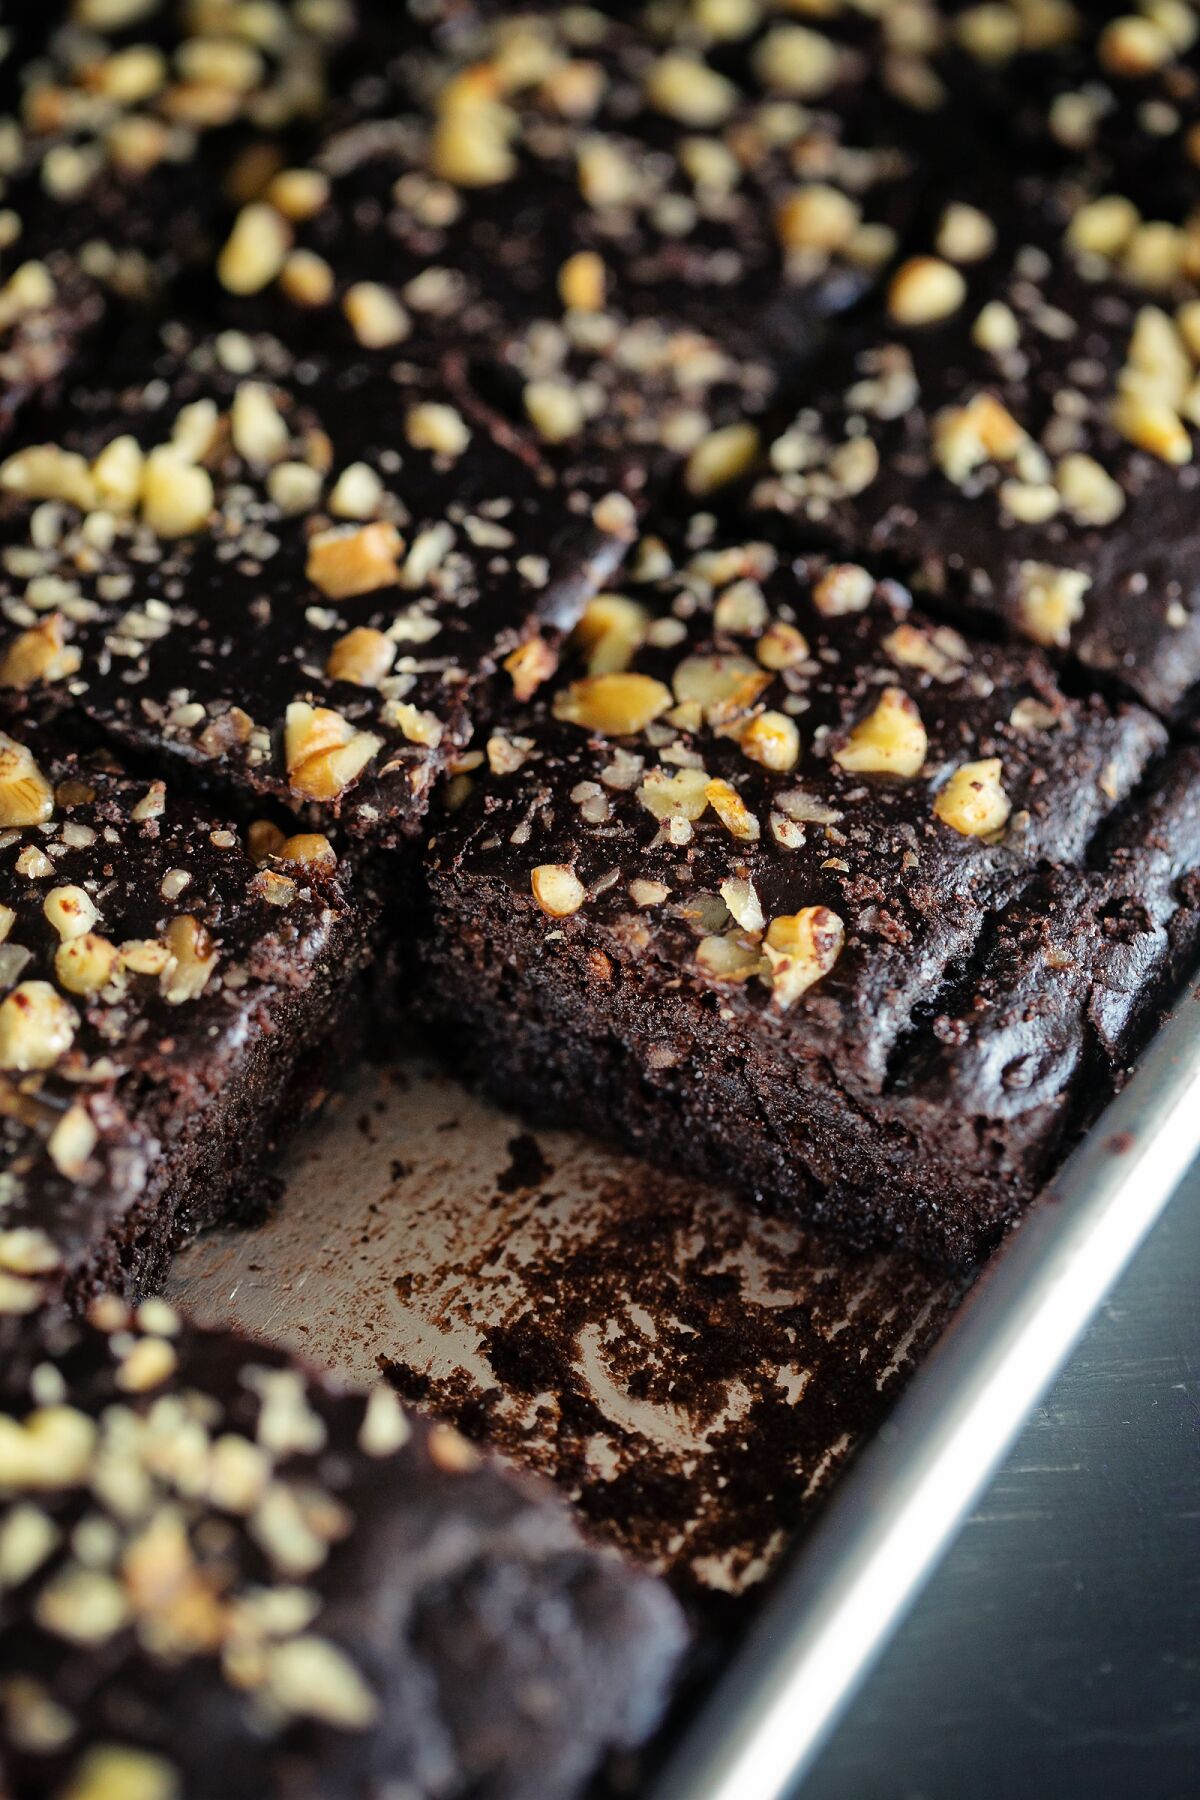 A pan of nut-topped brownies.